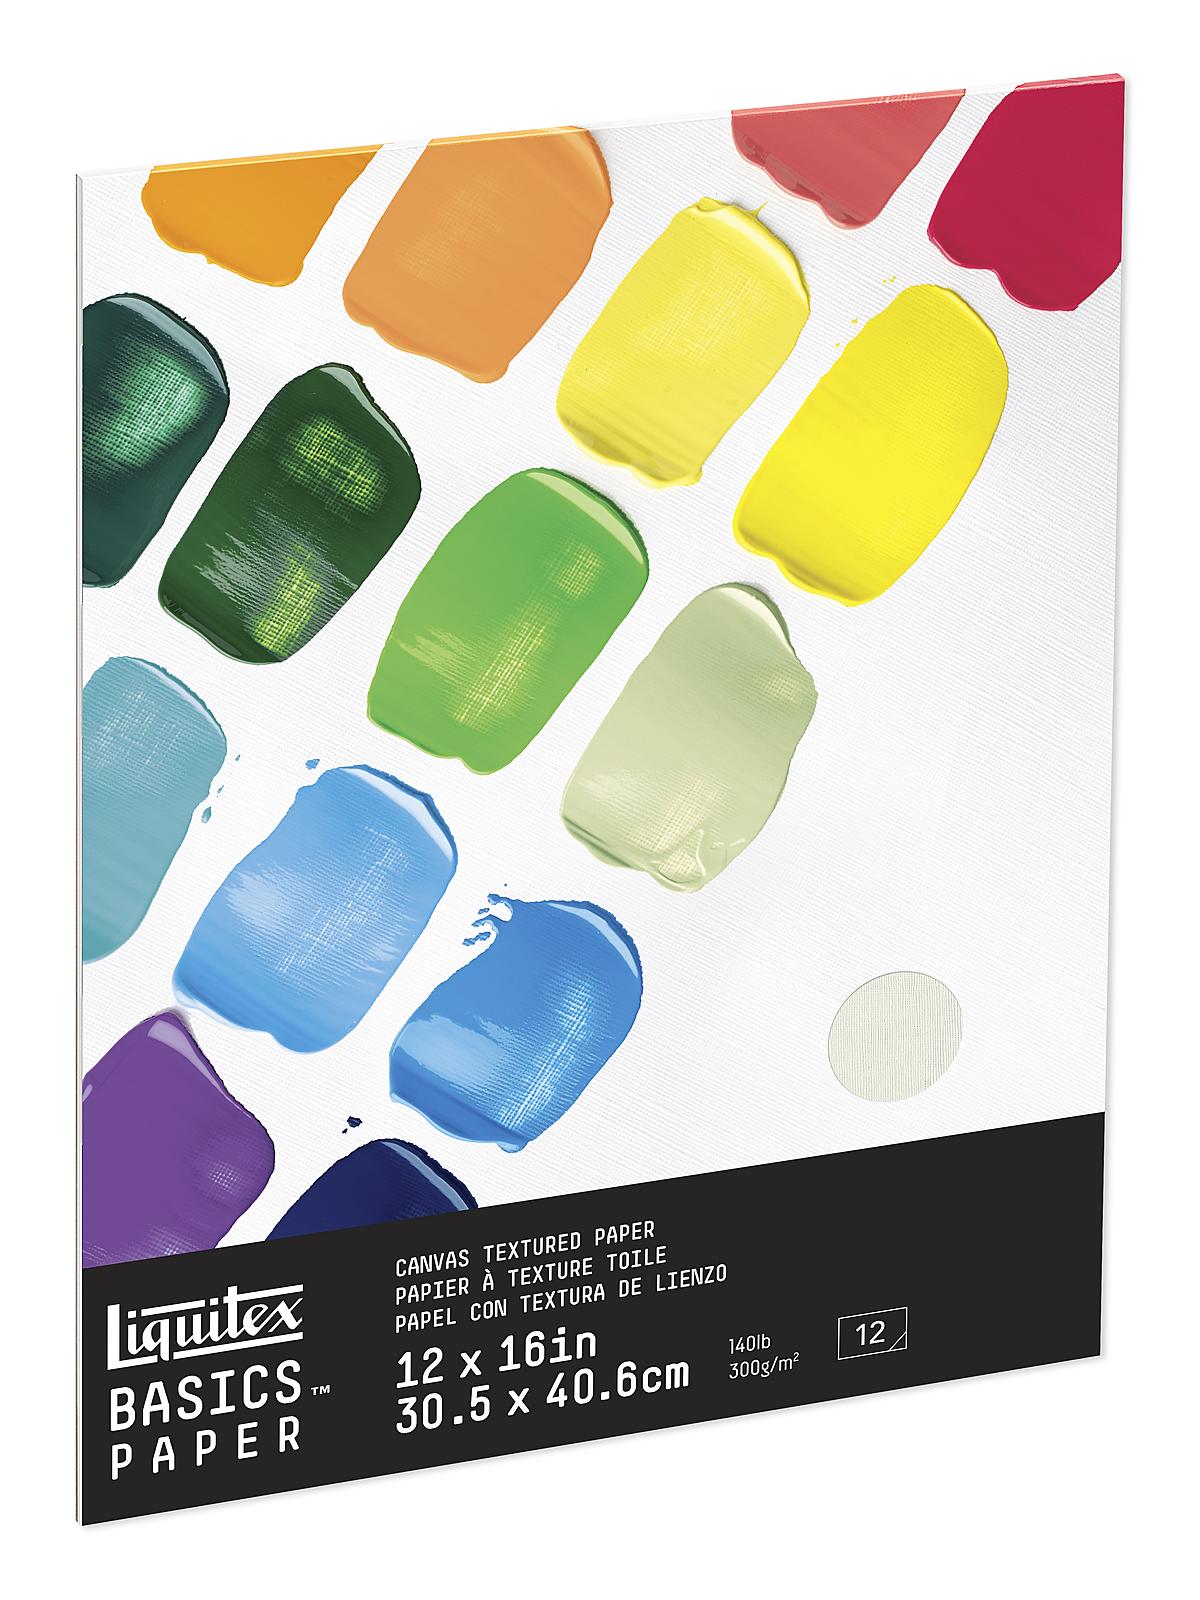 BASICS Acrylic Canvas Textured Paper Pads 12 In. X 16 In. 12 Sheets